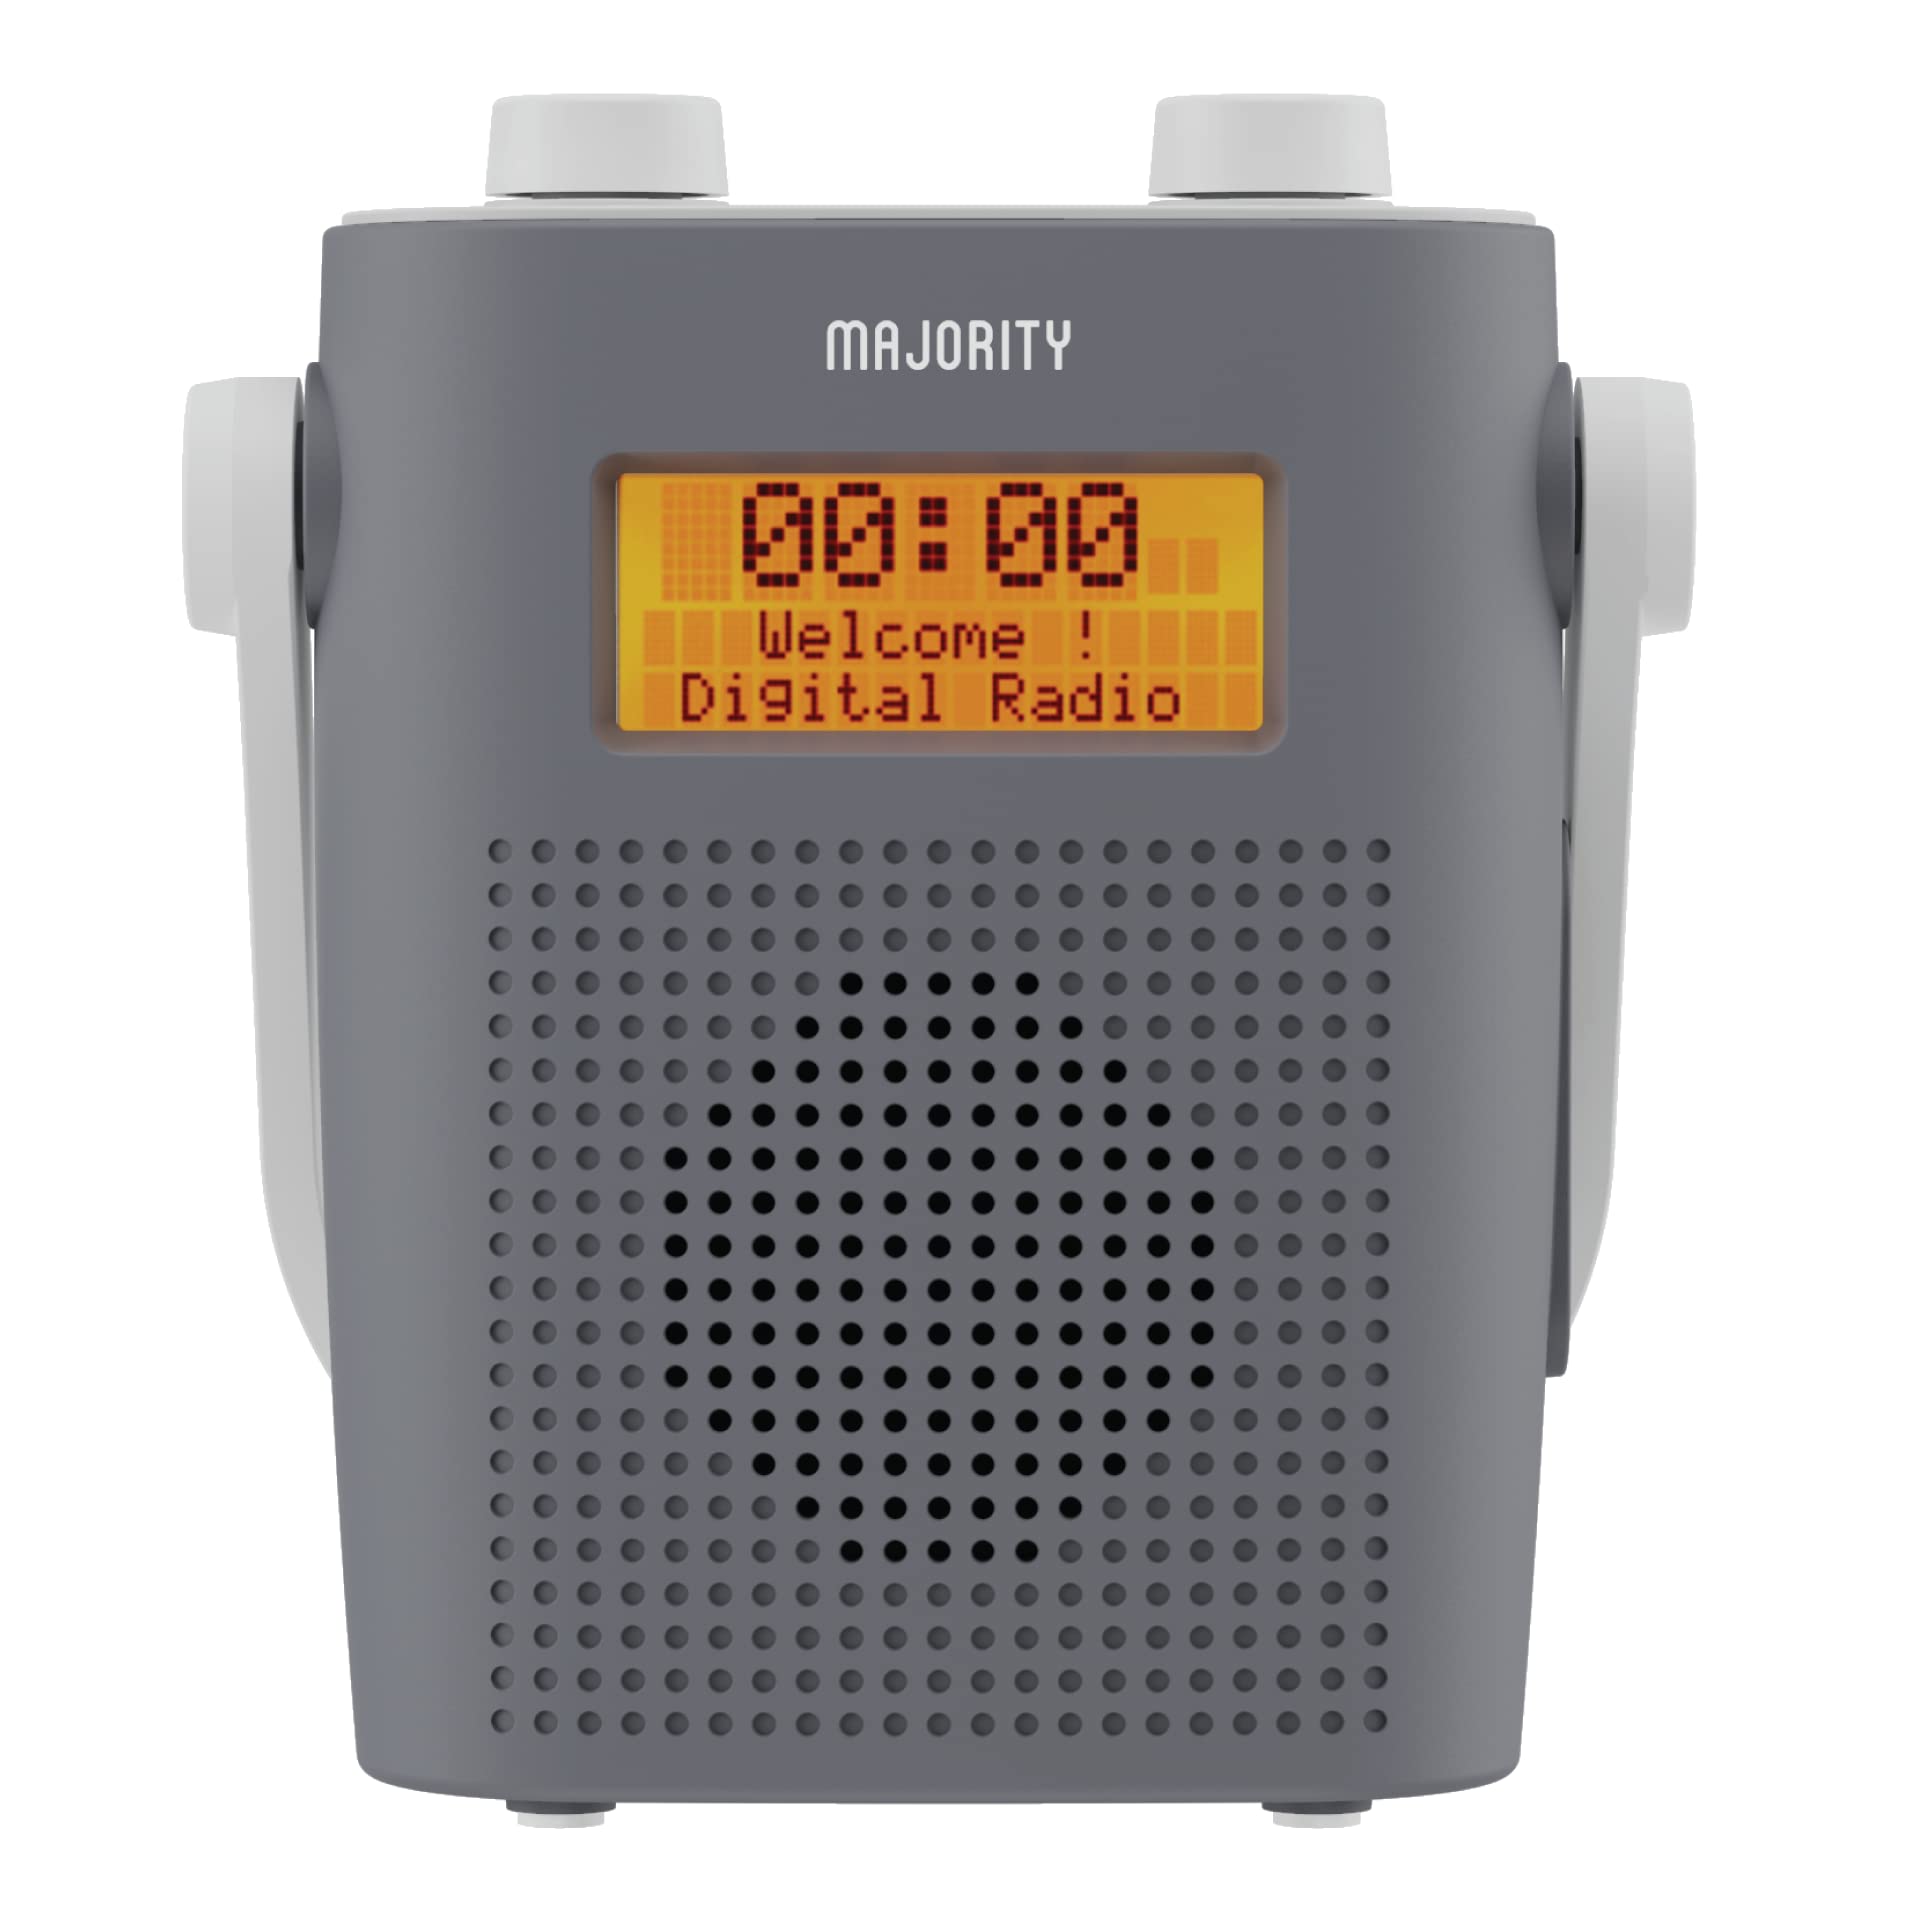 Waterproof DAB Radio with Bluetooth | Portable IPX5 Shower DAB, DAB+ Digital and FM Radio | Majority Eversden Water Resistant Radio | In-Built Battery, Mains Powered, 20 Presets and LED Display